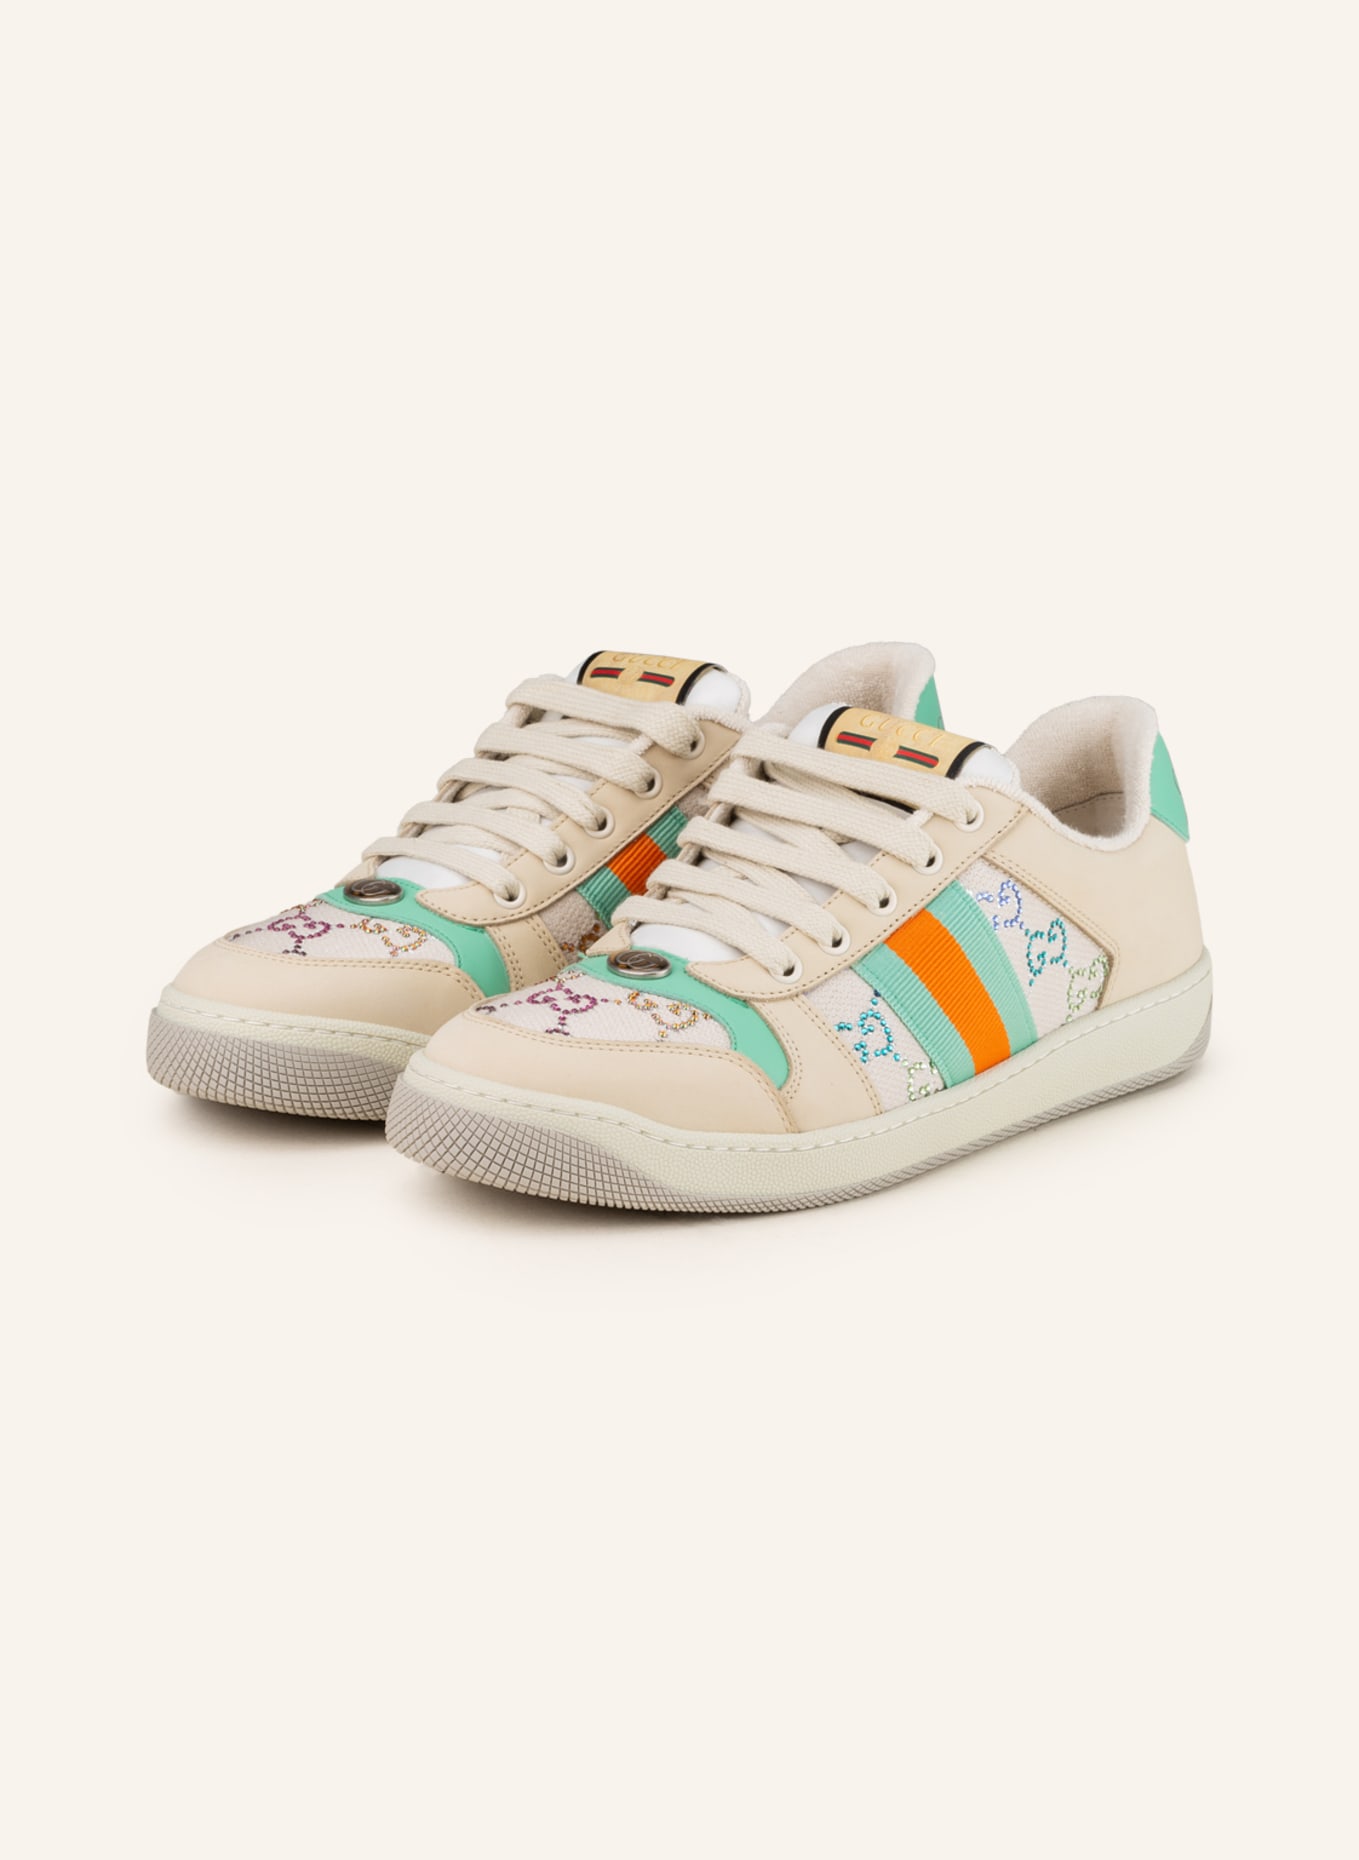 GUCCI Sneakers with decorative gems, Color: BEIGE/ ORANGE/ MINT (Image 1)